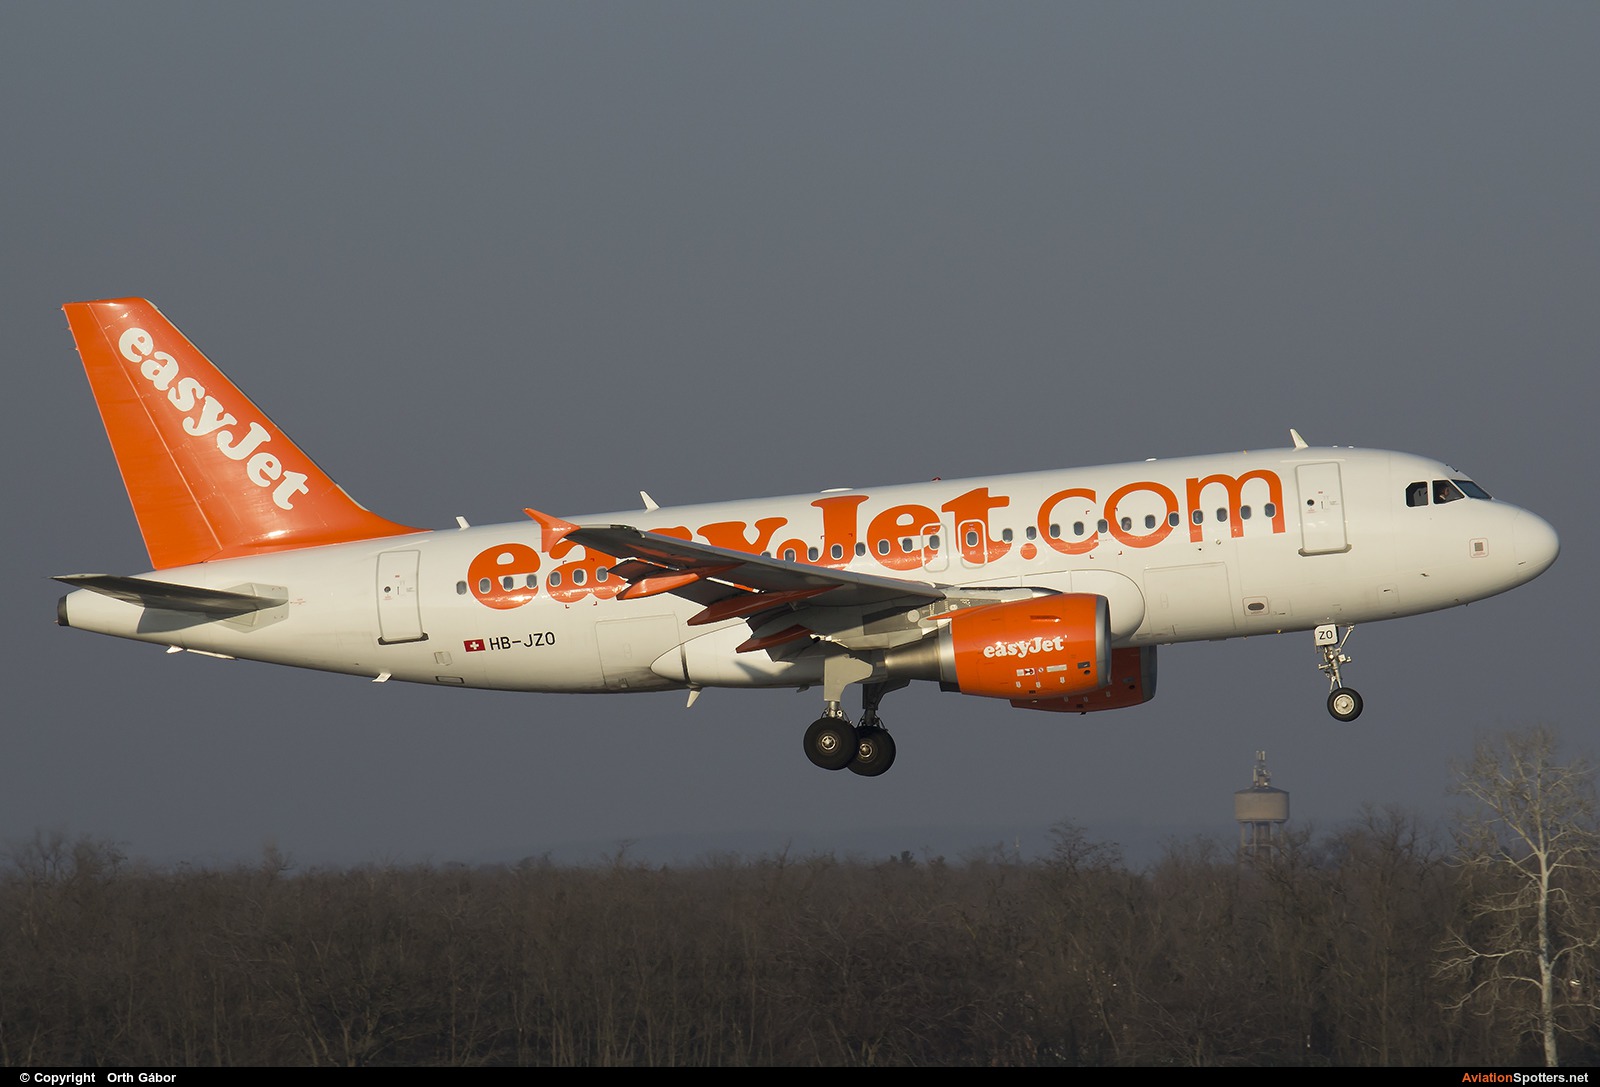 easyJet Switzerland  -  A319-111  (HB-JZO) By Orth Gábor (Roodkop)